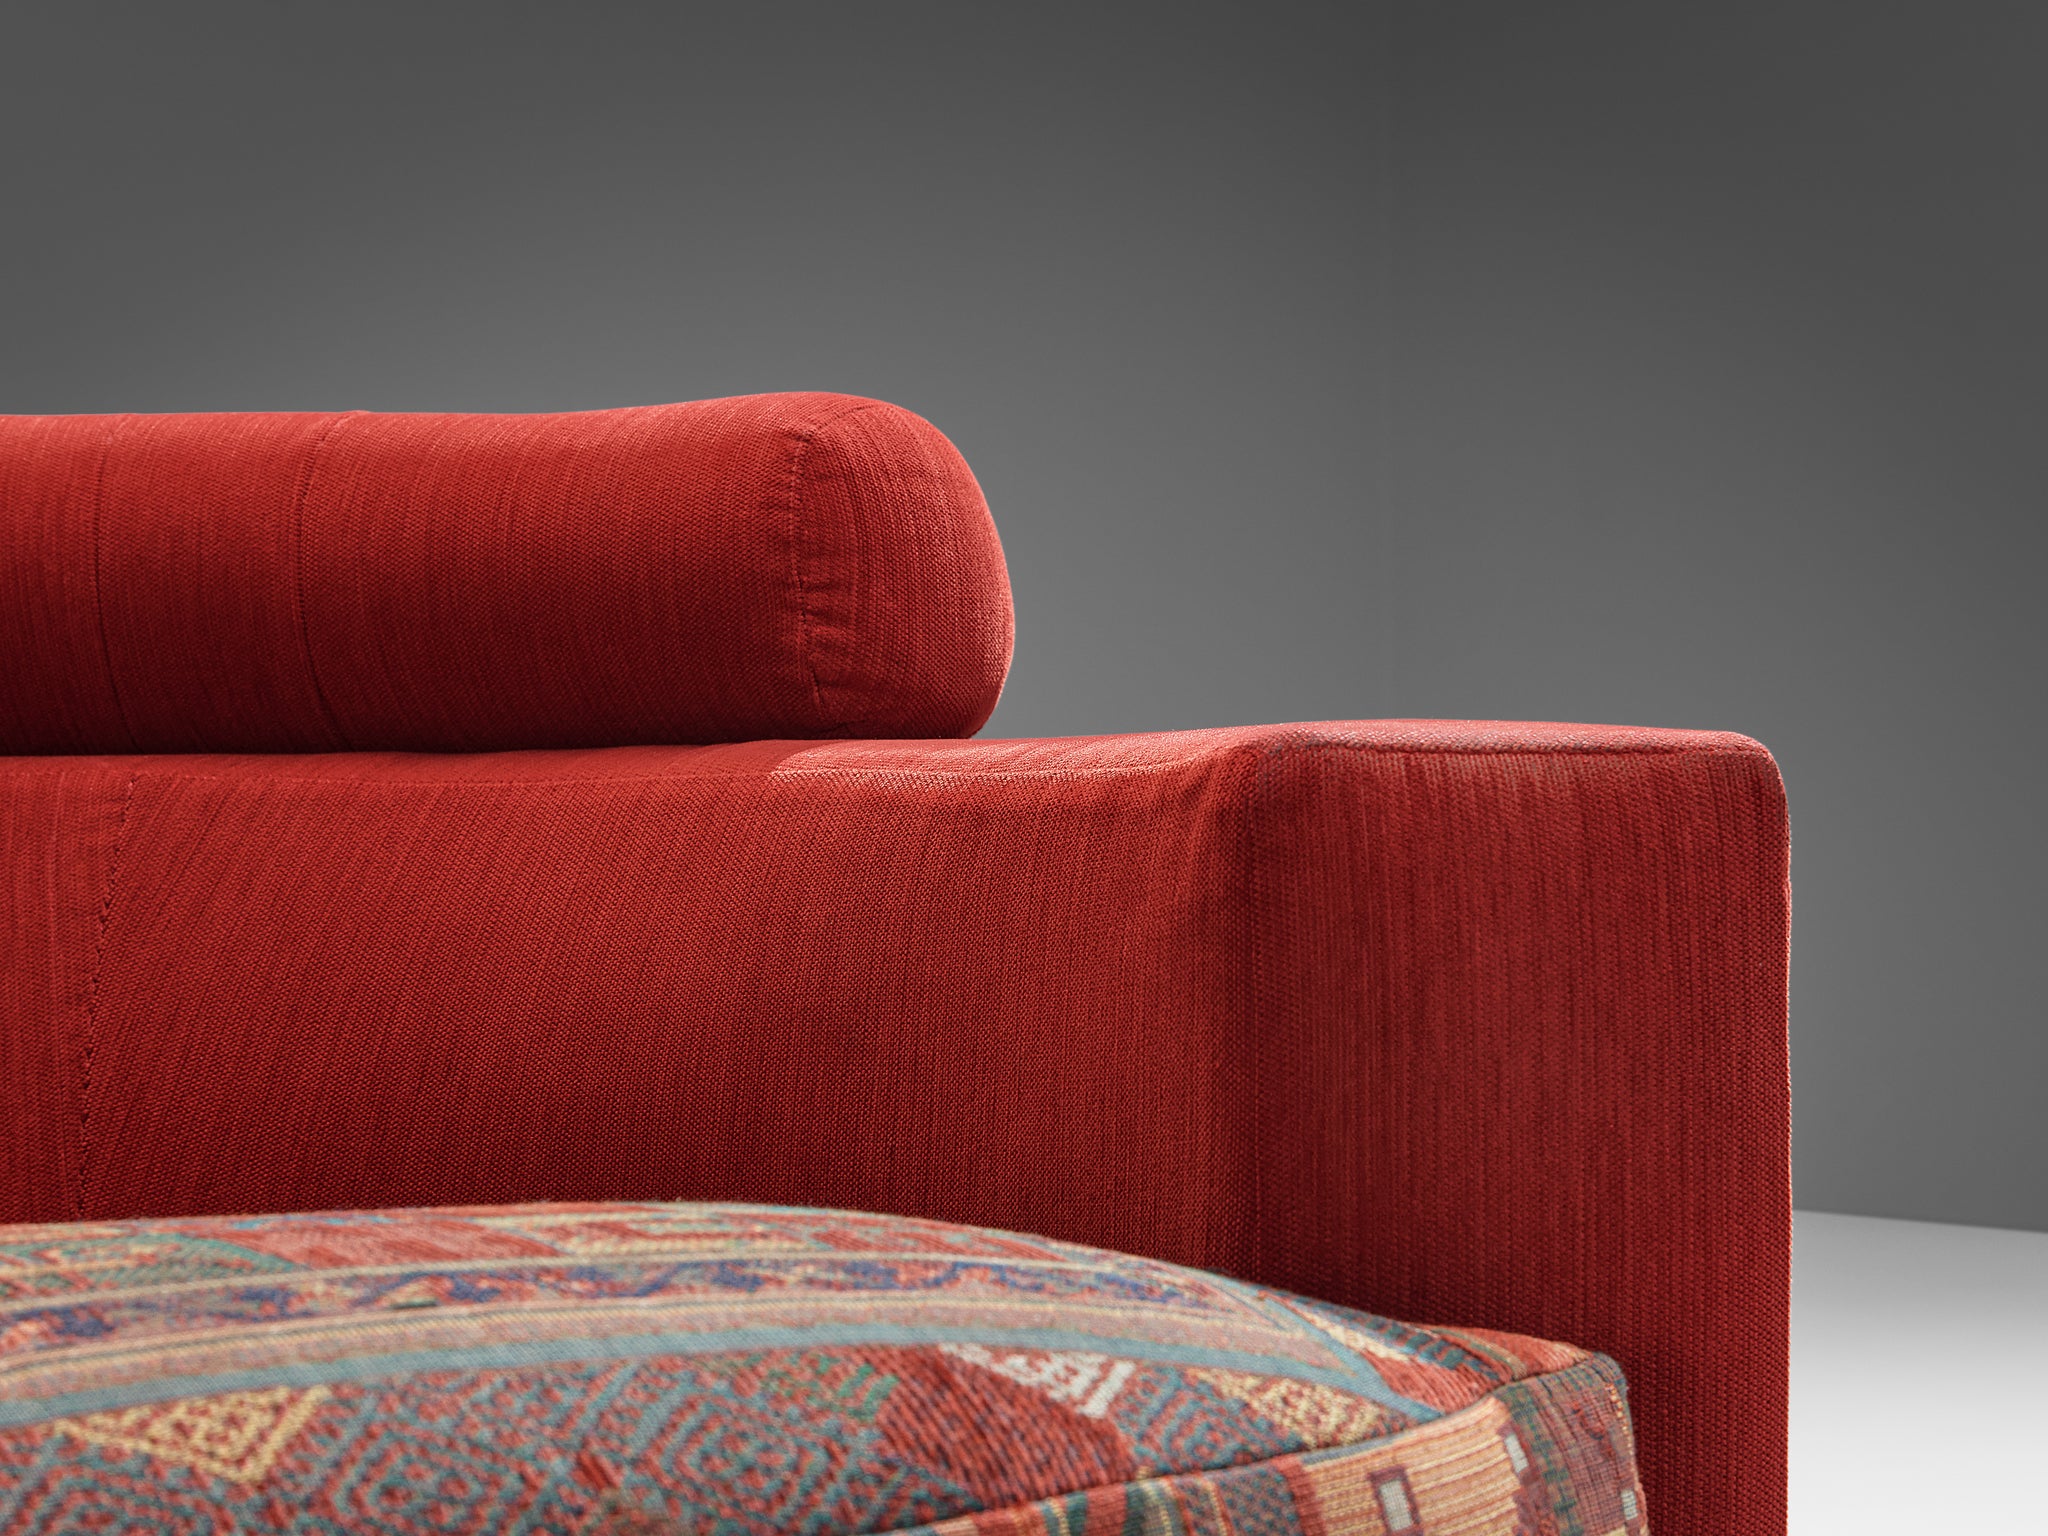 Roche Bobois Pair of Lounge Chairs in Red and Patterned Upholstery